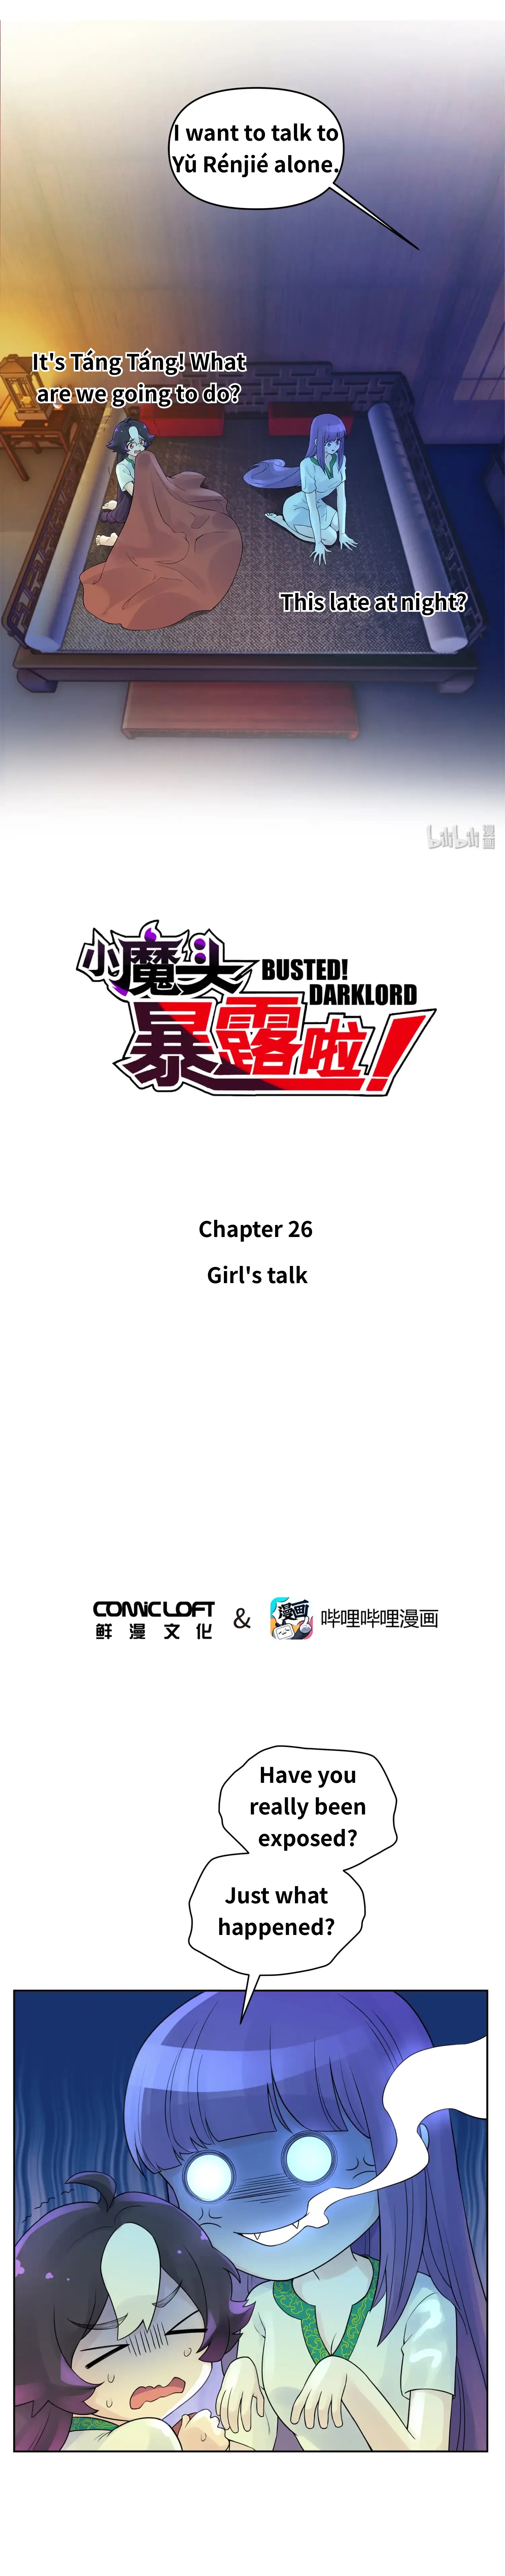 Busted! Darklord Chapter 26: Girl's Talk - Picture 1